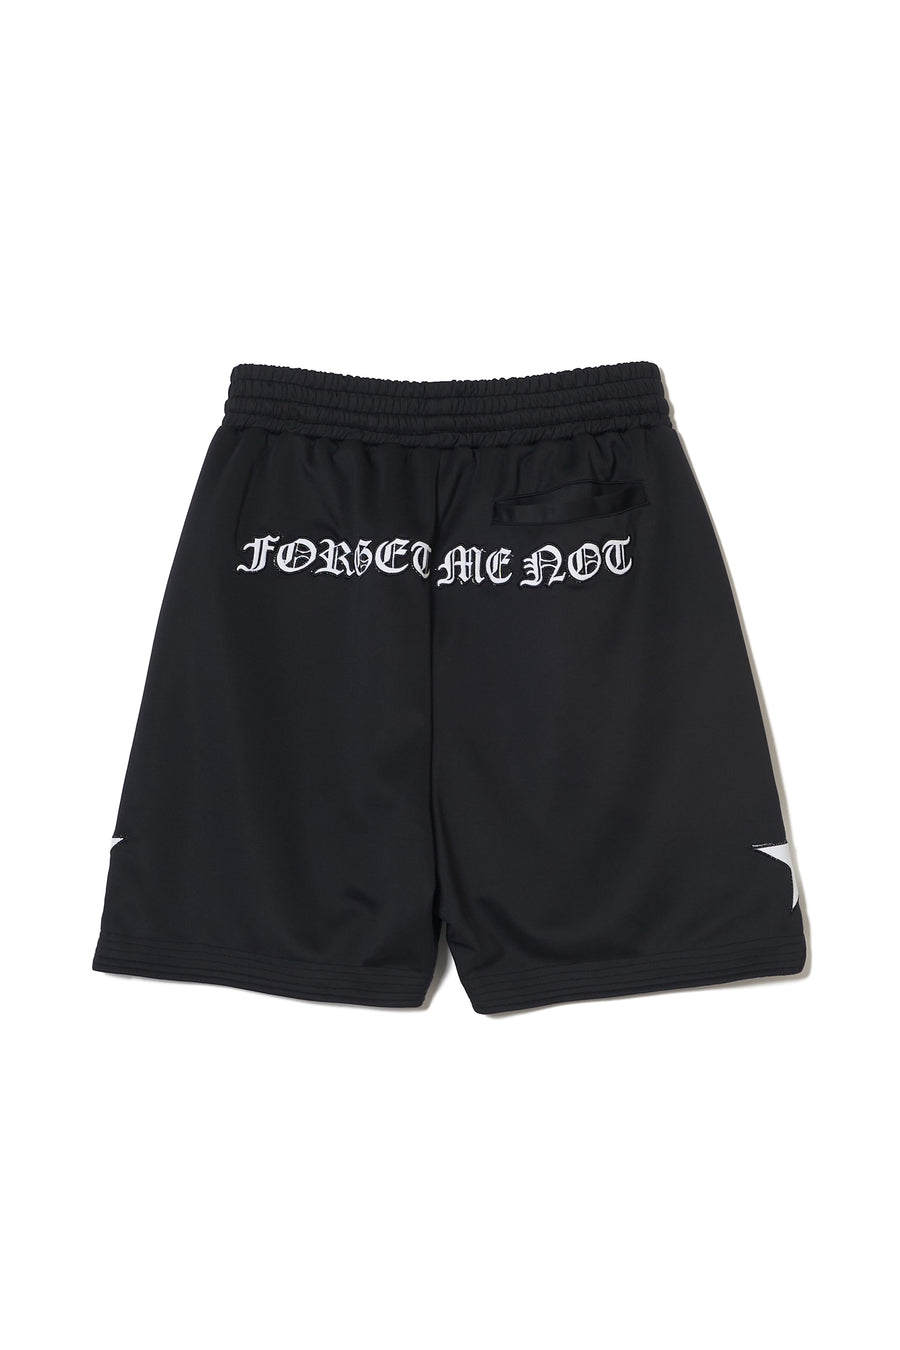 [Sales start in mid-March] MAYO Embroidery Game Shorts - BLACK